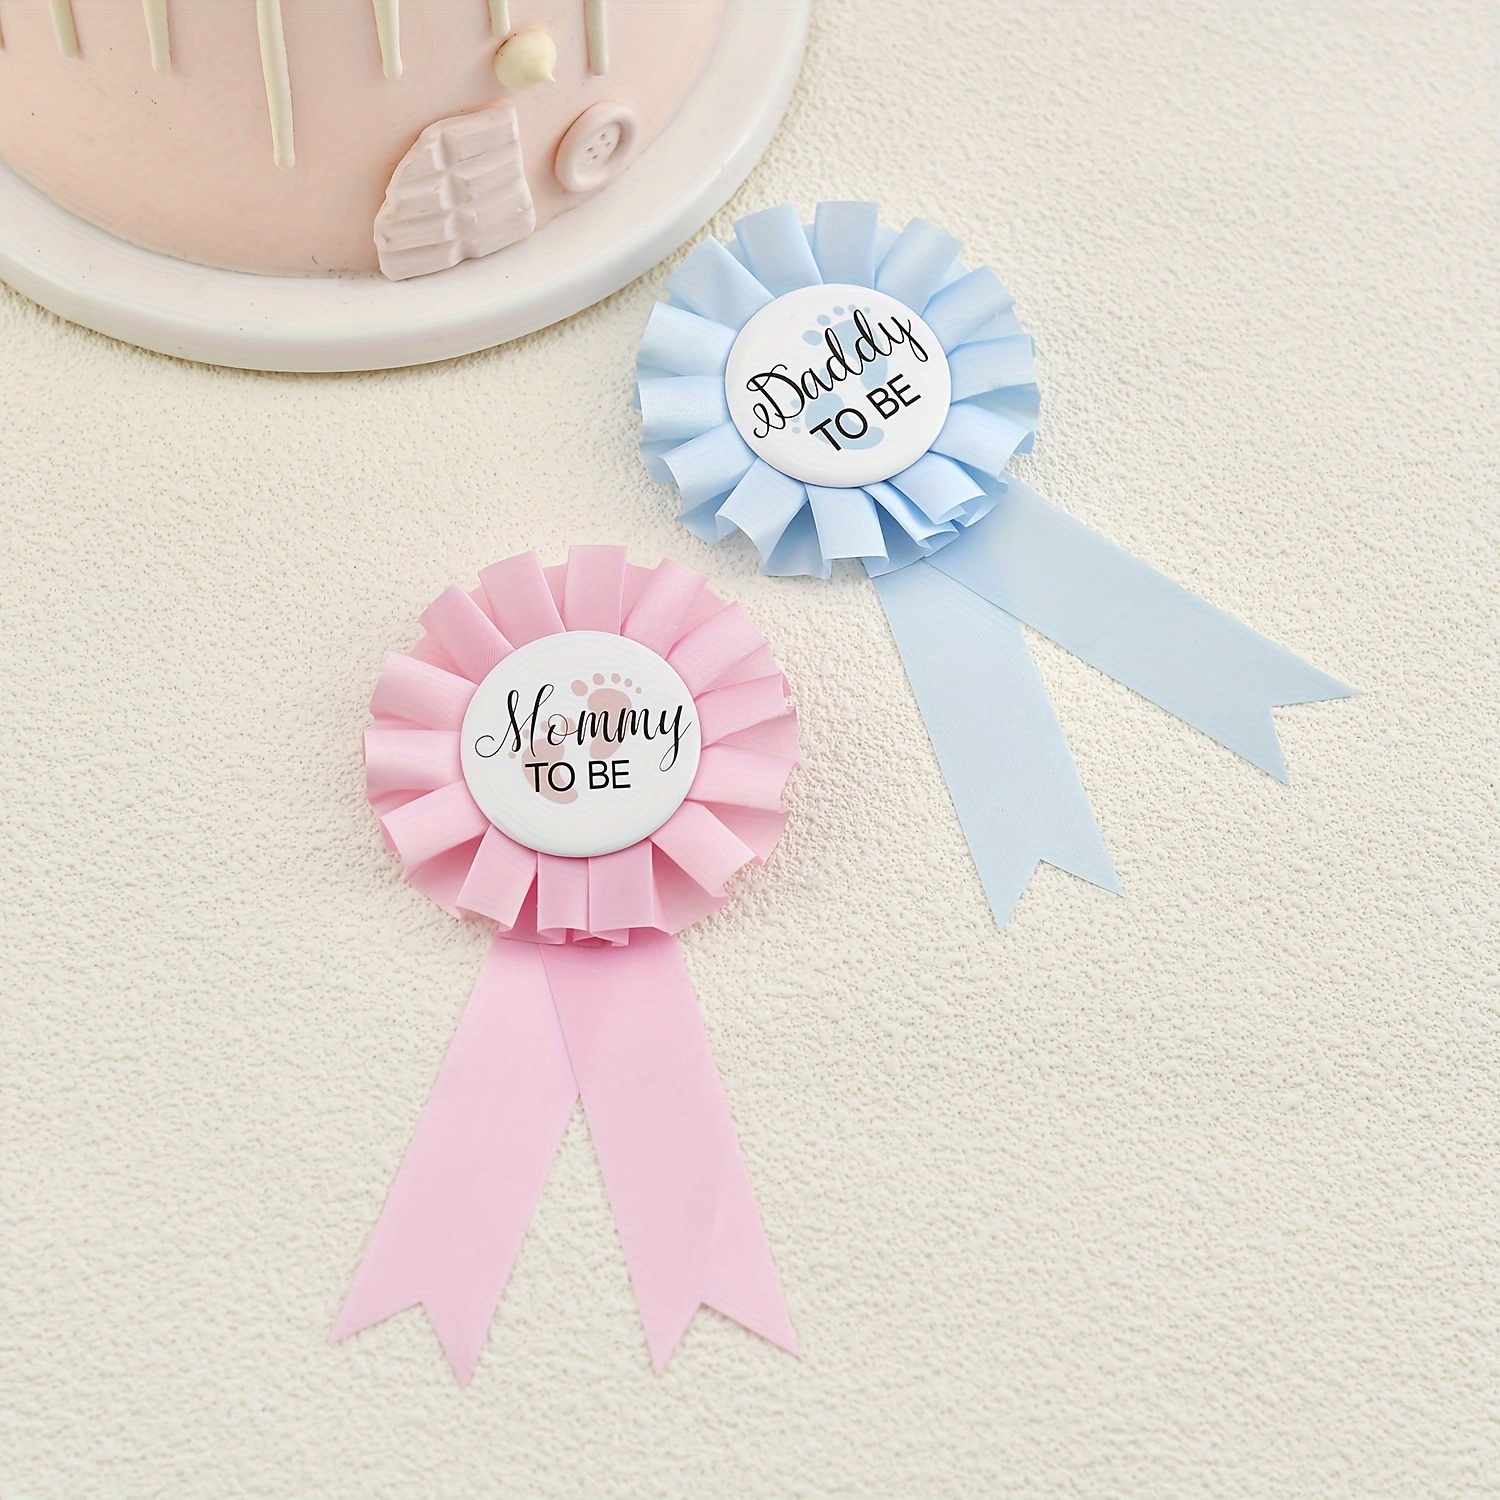 Pin on Gifts for Mommy or Daddy